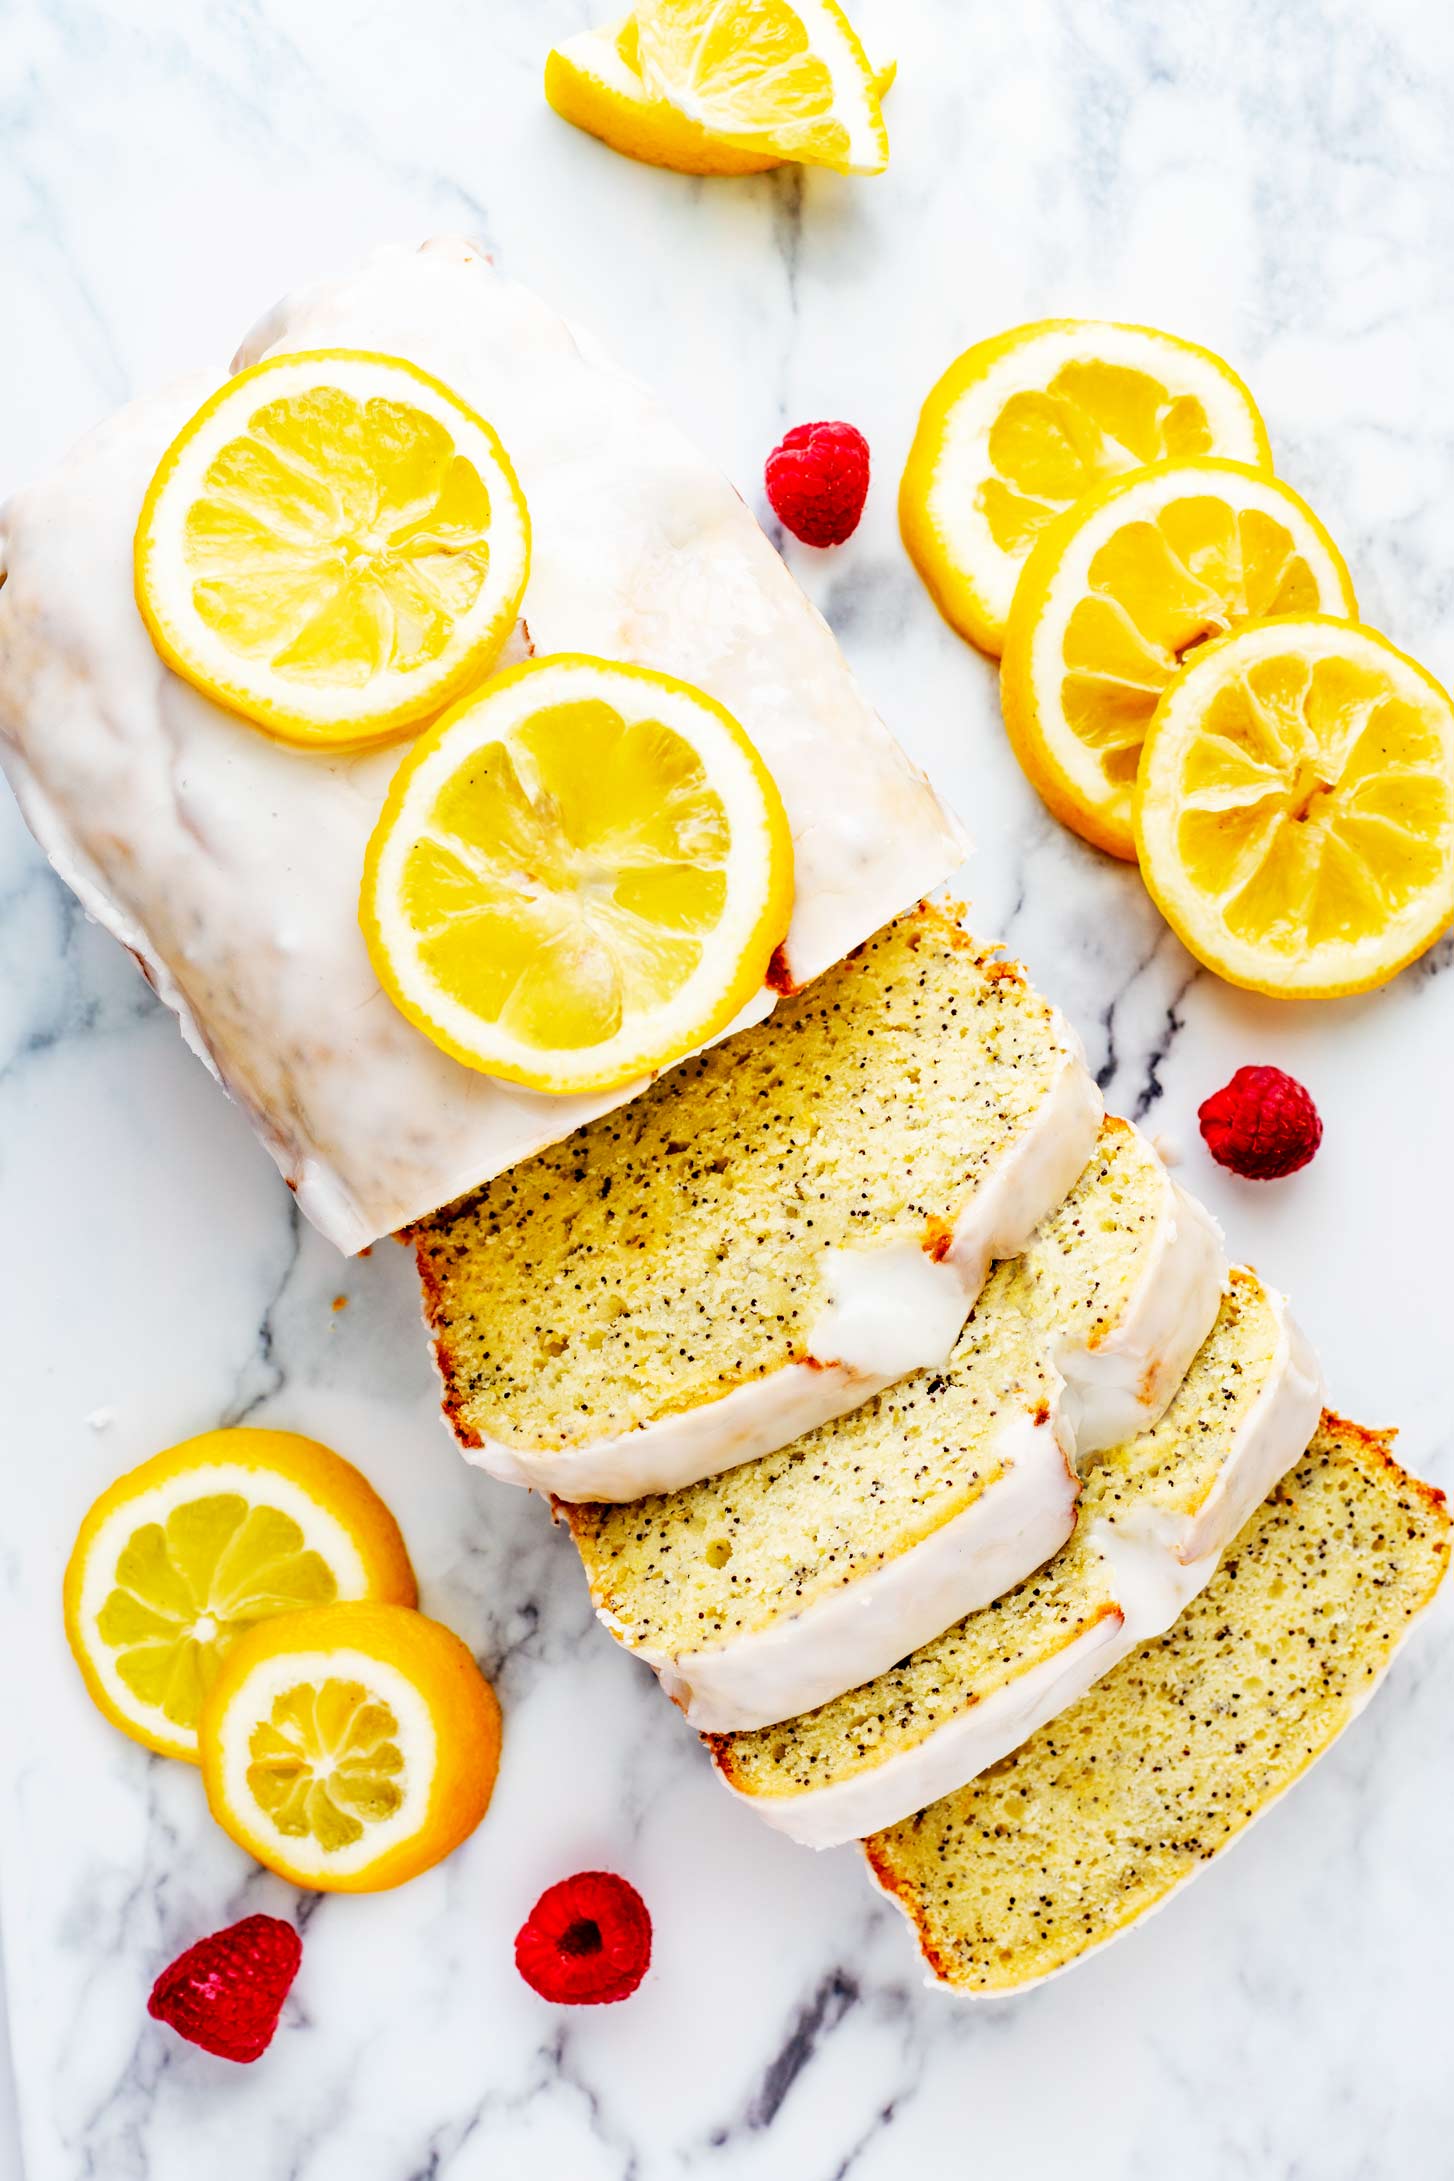 Overhead photo of a glazed lemon loaf garnished with candied lemons on a white board.